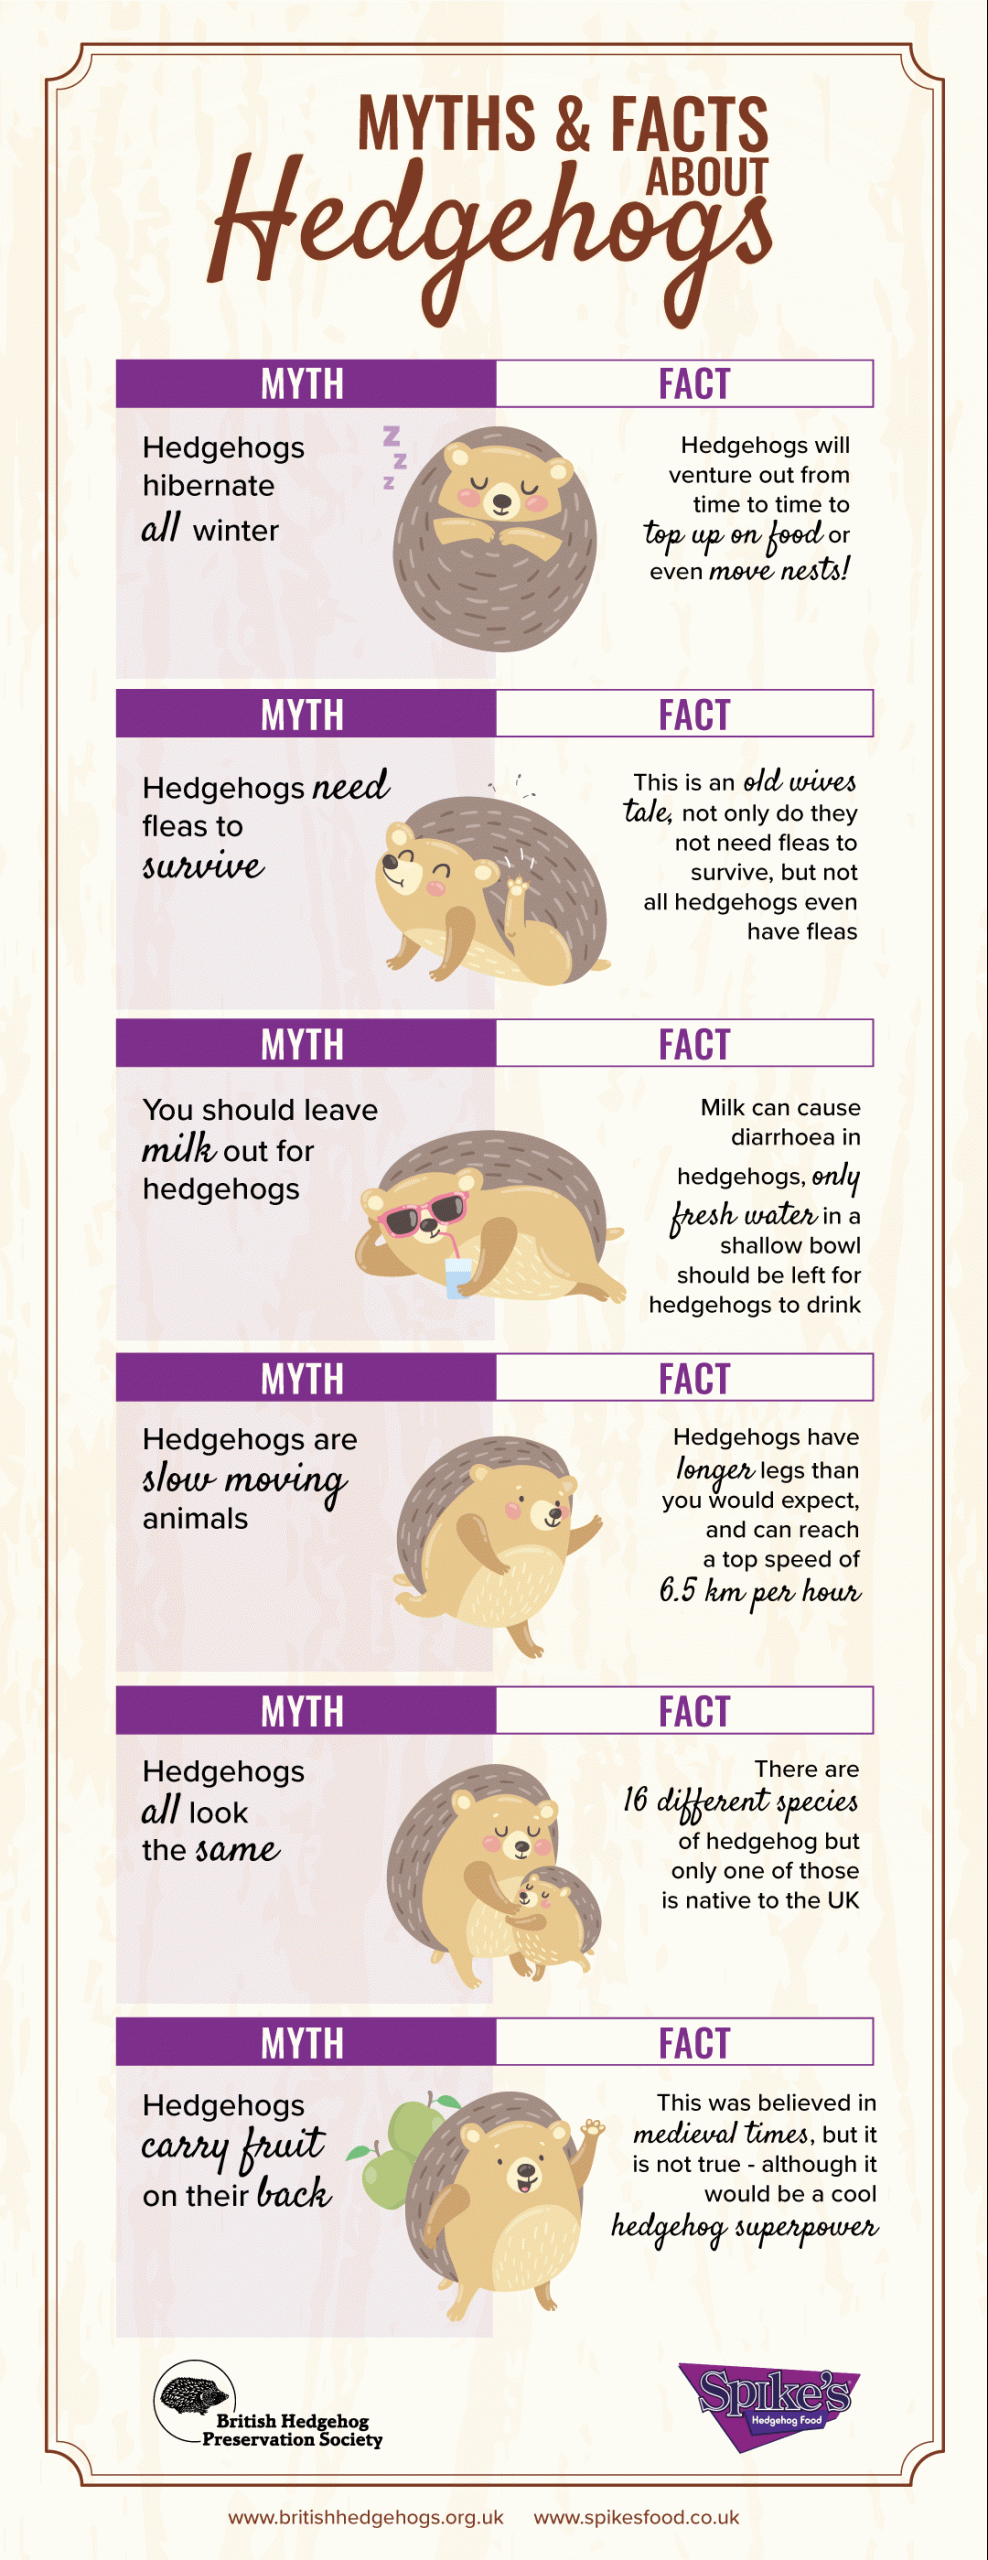 Myth: Hedgehogs hibernate all winter. Fact: Hedgehogs will venture out from time to time to top up on food or even move nests! Myth: Hedgehogs need fleas to survive. Fact: This is an old wives tale, not only do they not need fleas to survive, but not all hedgehogs even have fleas. Myth: You should leave milk out for hedgehogs. Fact: Milk can cause diarrhoea in hedgehogs, only fresh water in a shallow bowl should be left for hedgehogs to drink Myth: Hedgehogs are slow moving animals. Fact: Hedgehogs have longer legs than you would expect, and can reach a top speed of 9 km per hour. Myth: Hedgehogs all look the same. Facts: There are 16 different species of hedgehog but only one of those is native to the UK. Myth: Hedgehogs carry fruit on their back. Fact: This was believed in medieval times, but it is not true (although it would be a cool hedgehog superpower)